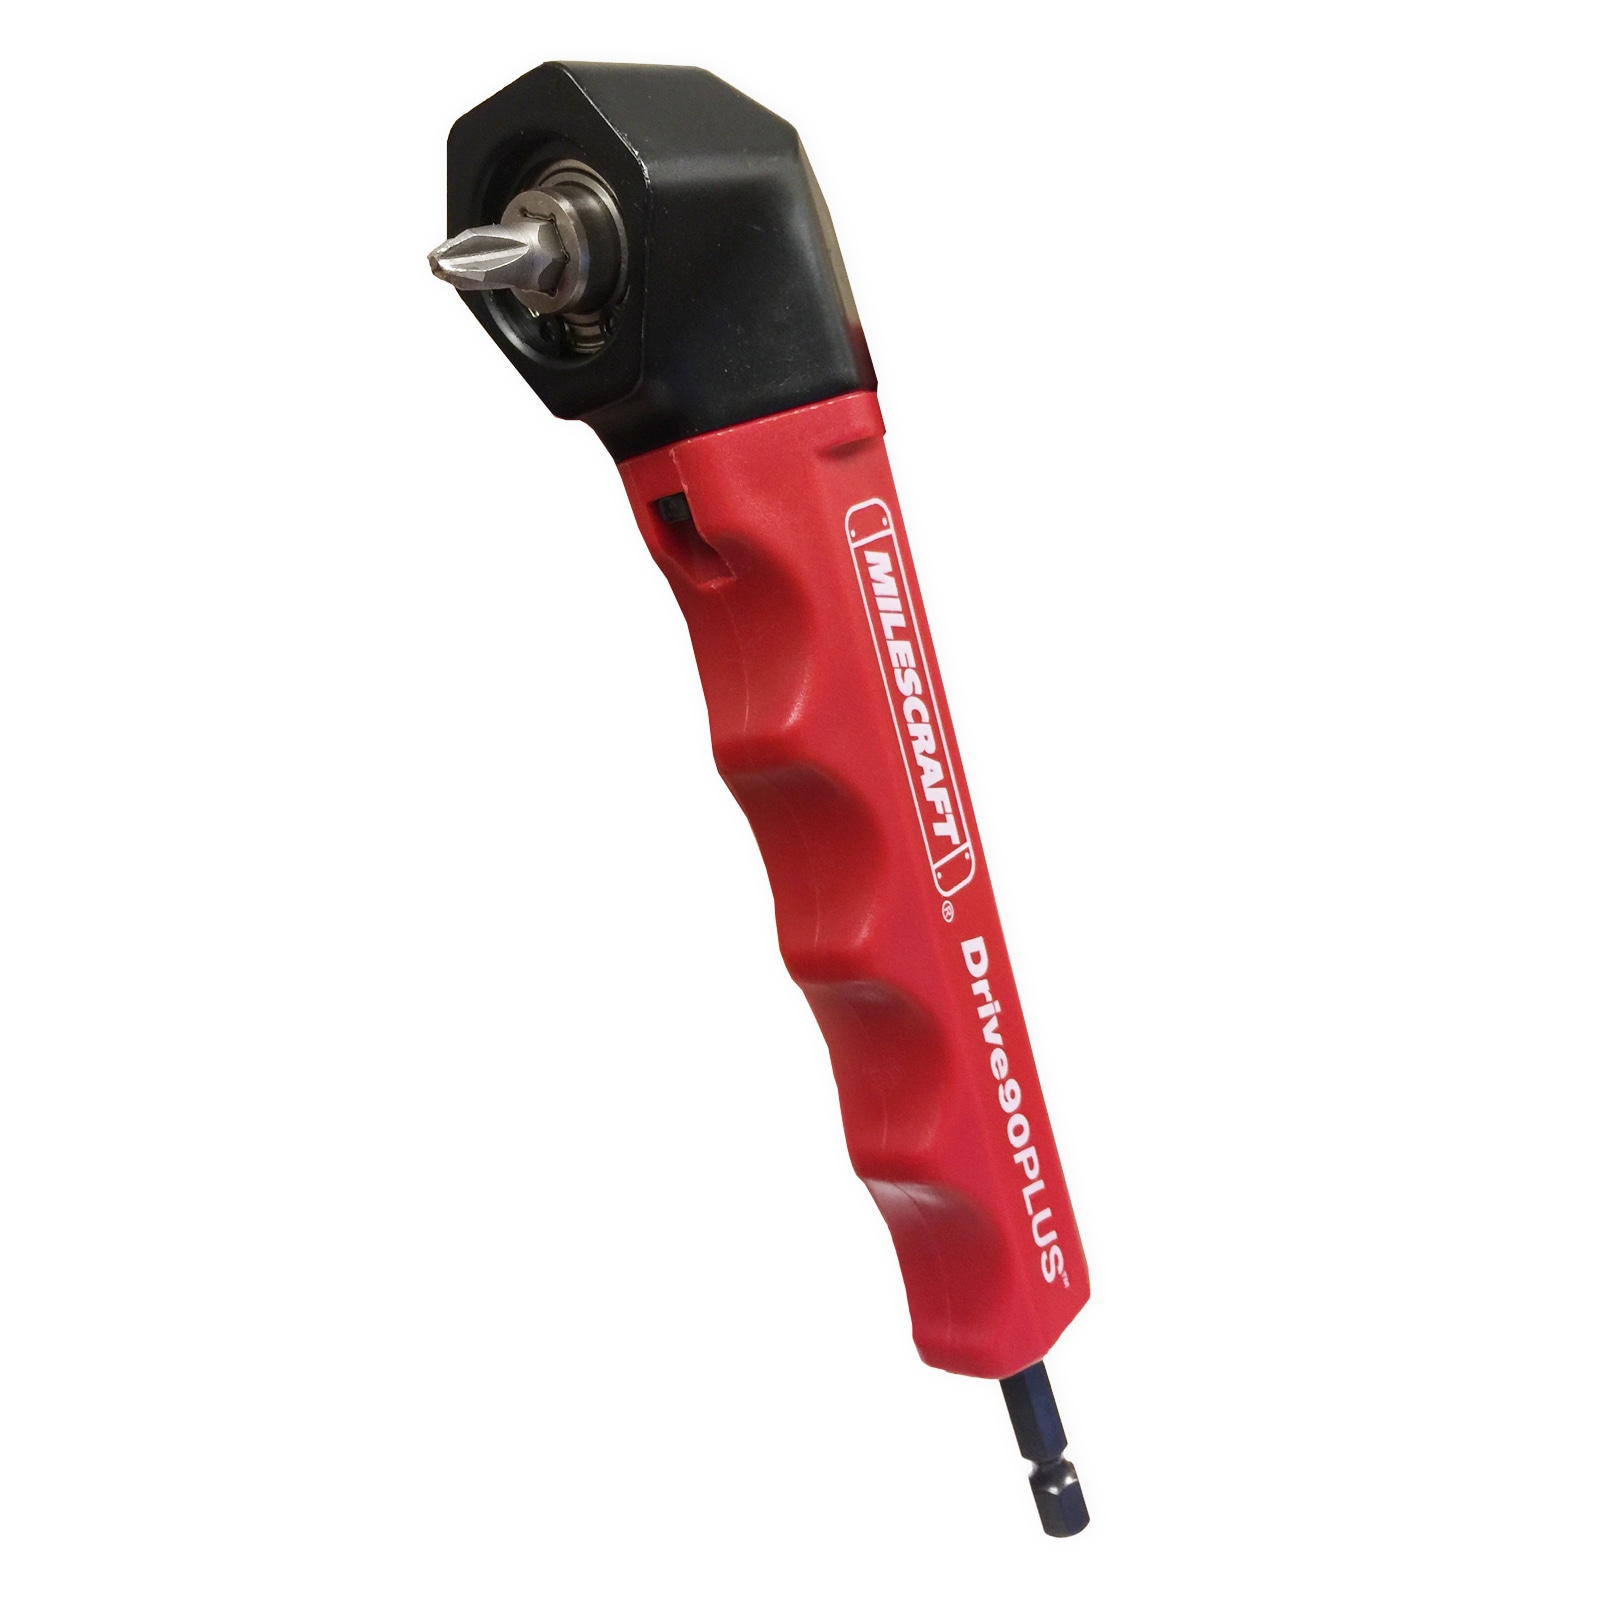 90 Degree Right Angle Adapter with Drill Bit for Hardware